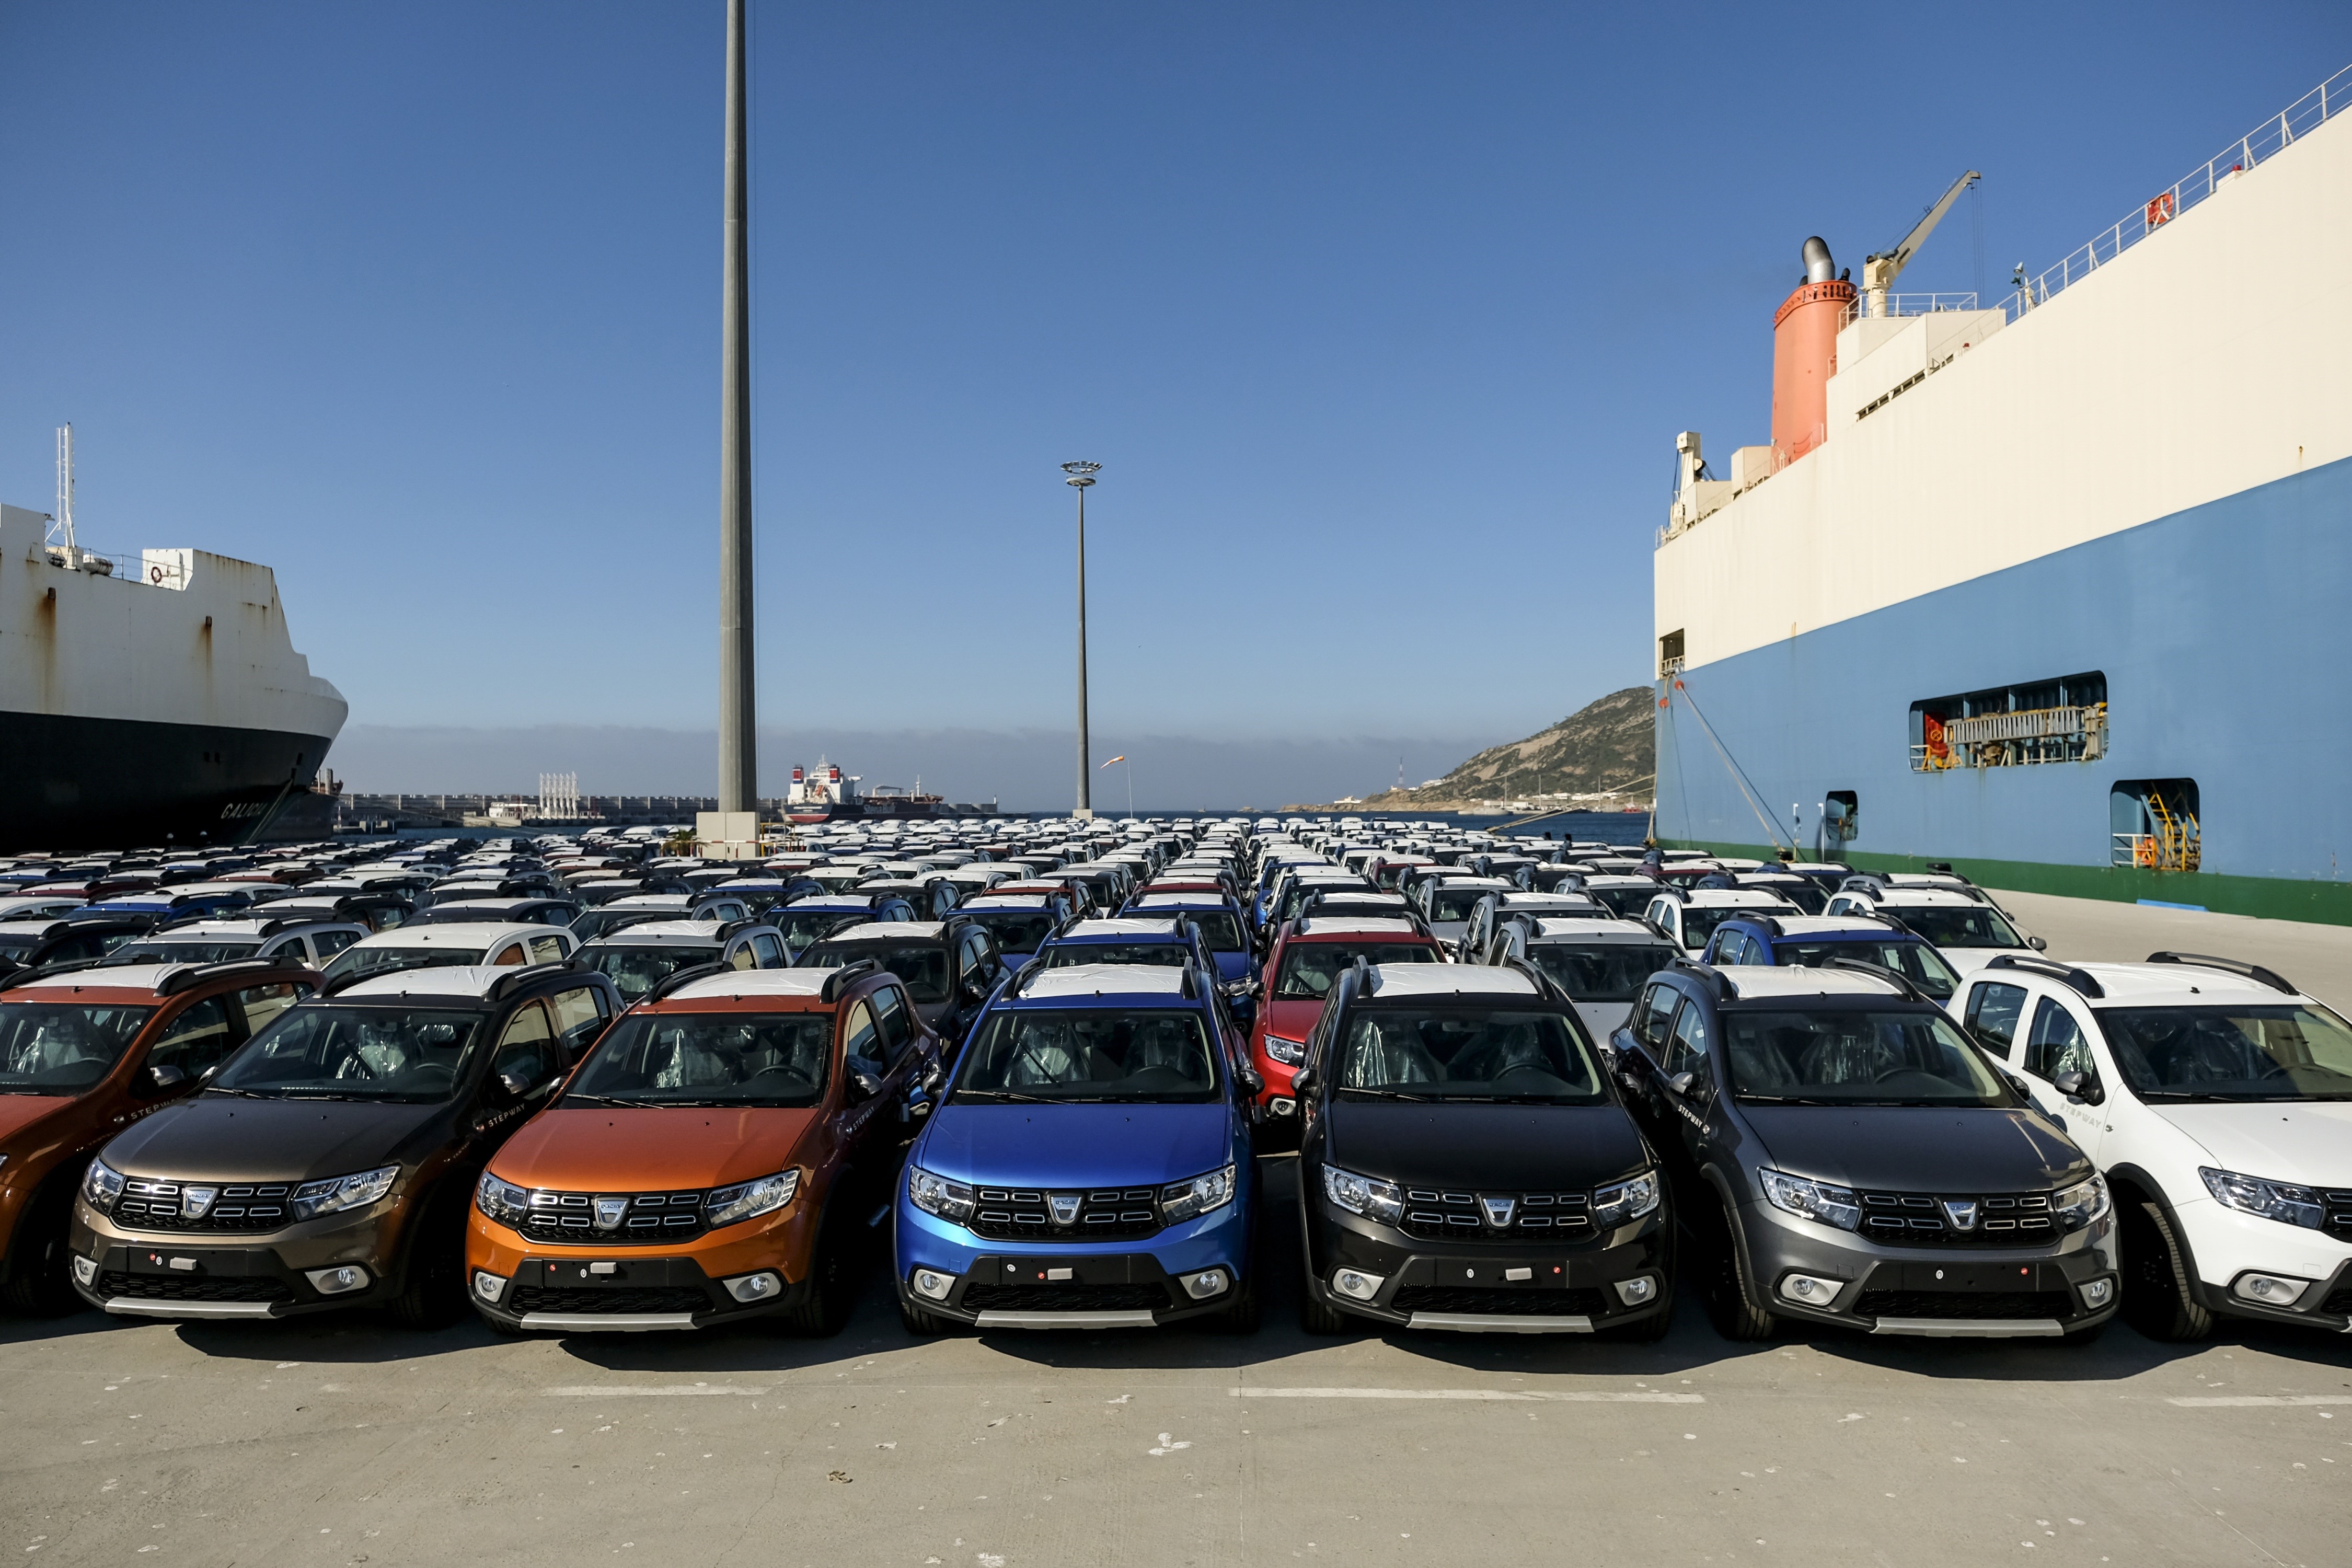 Groupe Renault celebrates 1,000,000th vehicle produced at the Tangier plant